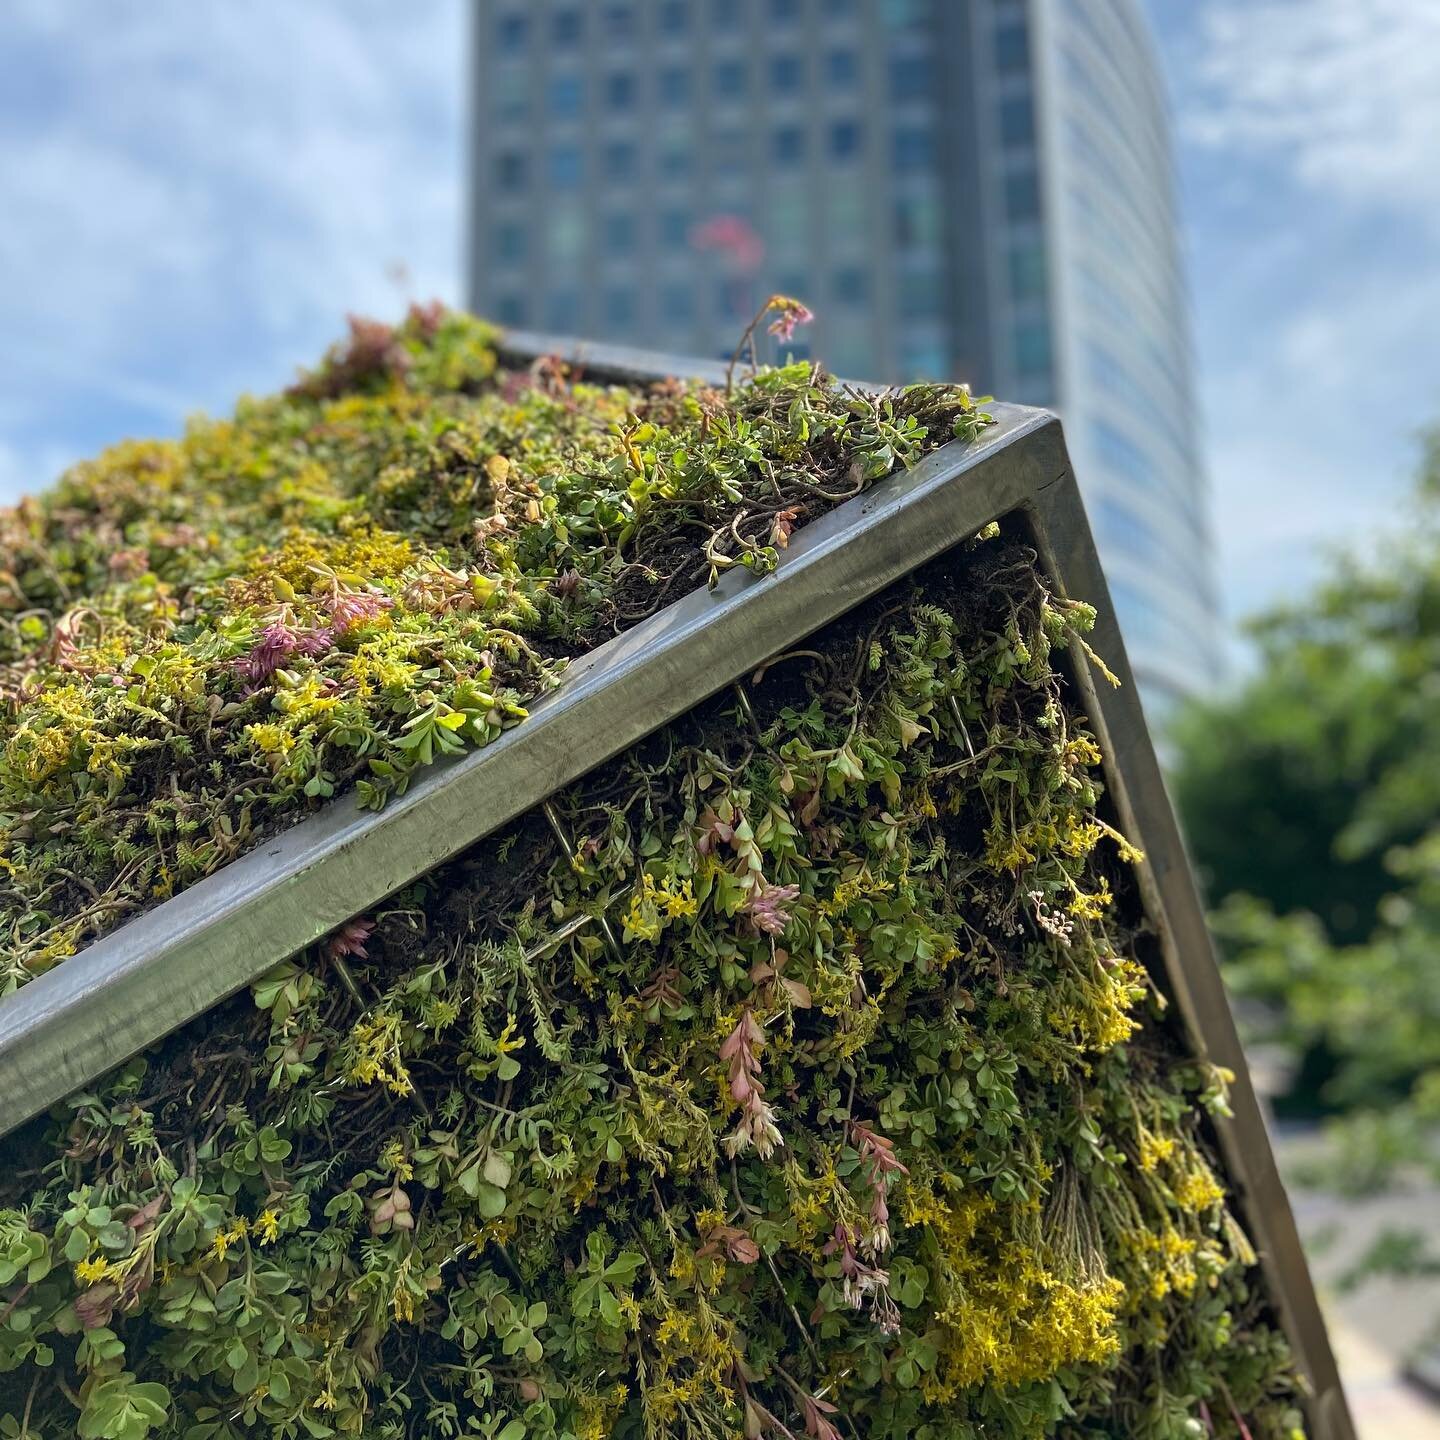 Located on Capital One&rsquo;s Tysons Corner Campus, this living art piece was designed by Patricia Leighton and installed by us. Check out our blog to read more about this cool project!